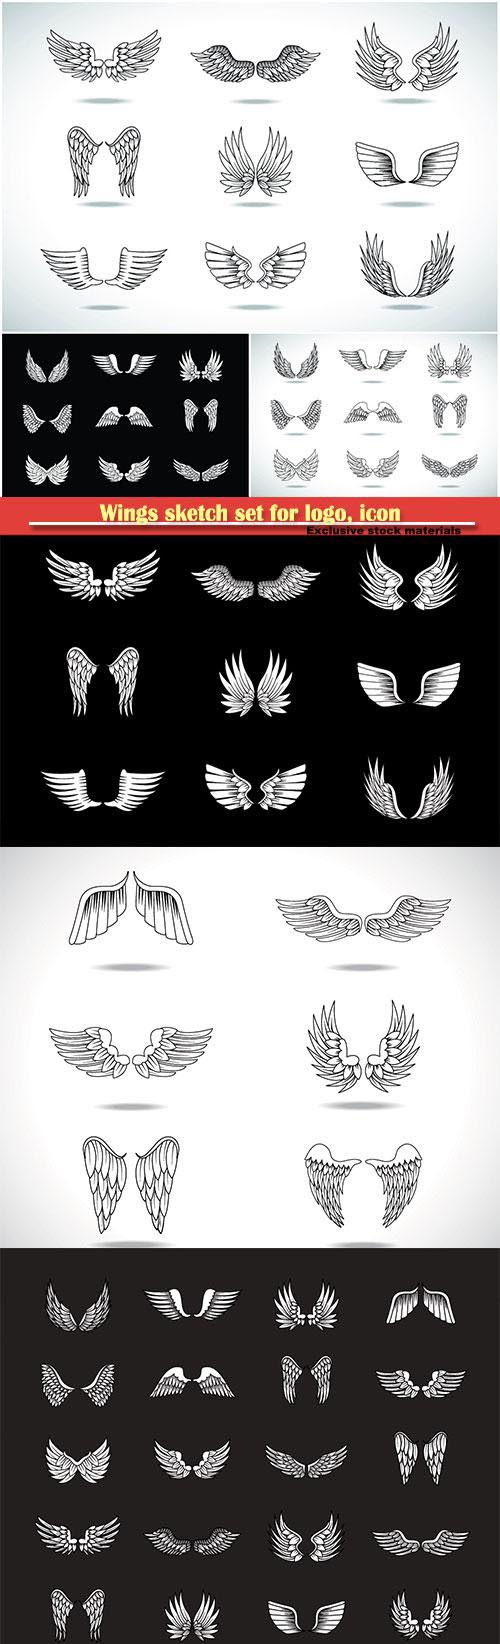 Wings sketch set for logo, icon, tattoo templates, emblem, label